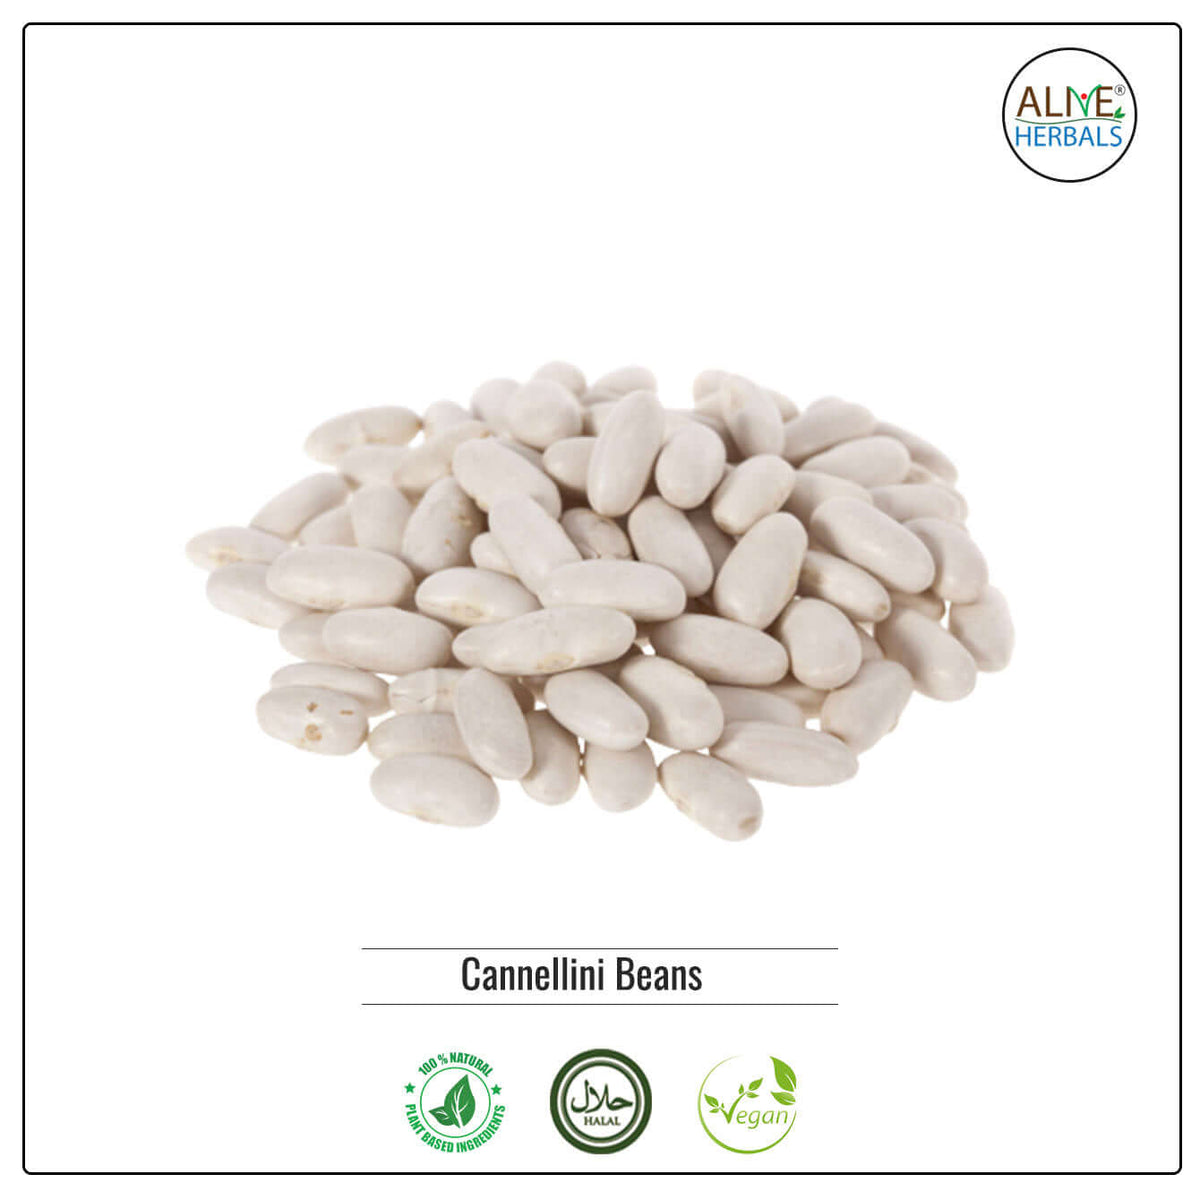 Cannellini Beans - Shop at Natural Food Store | Alive Herbals.